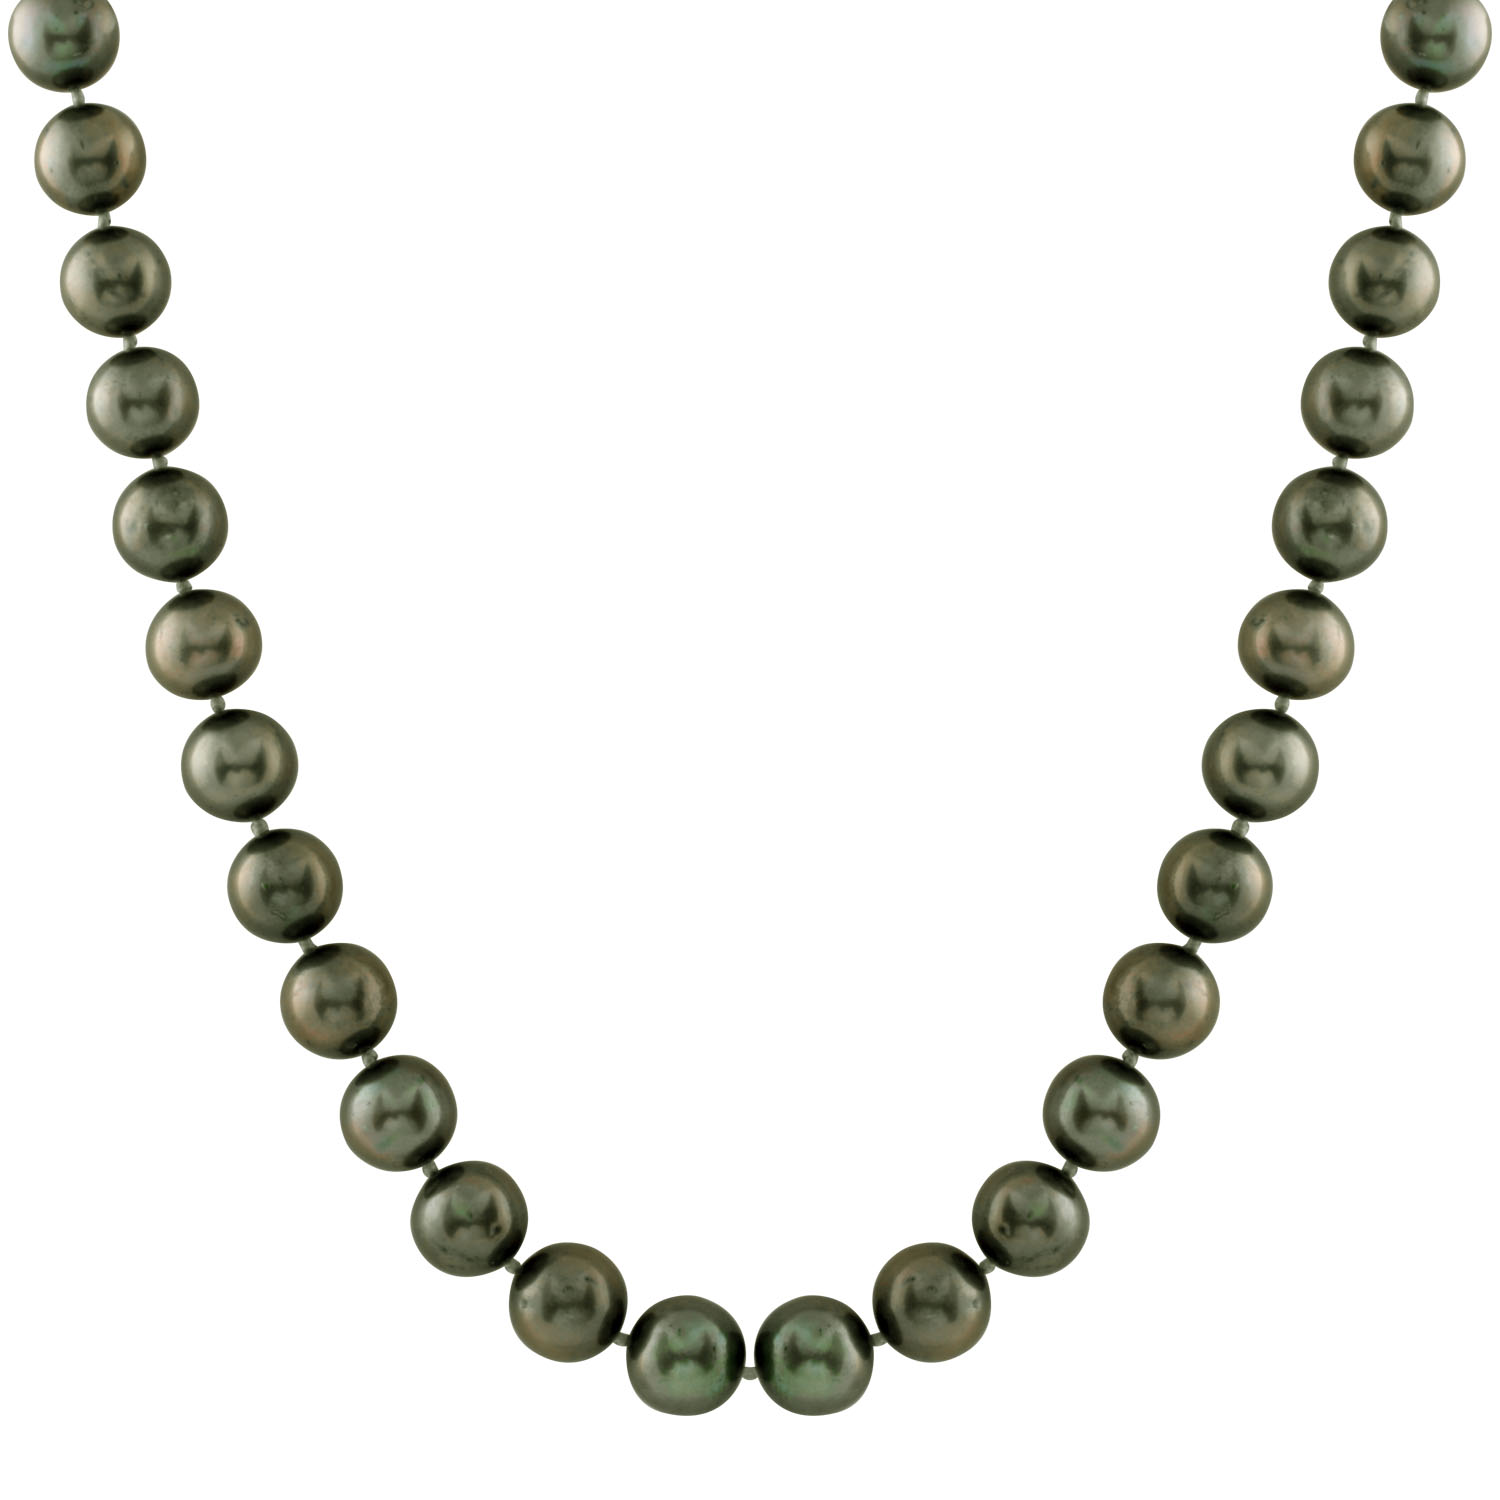 New green pearl necklace